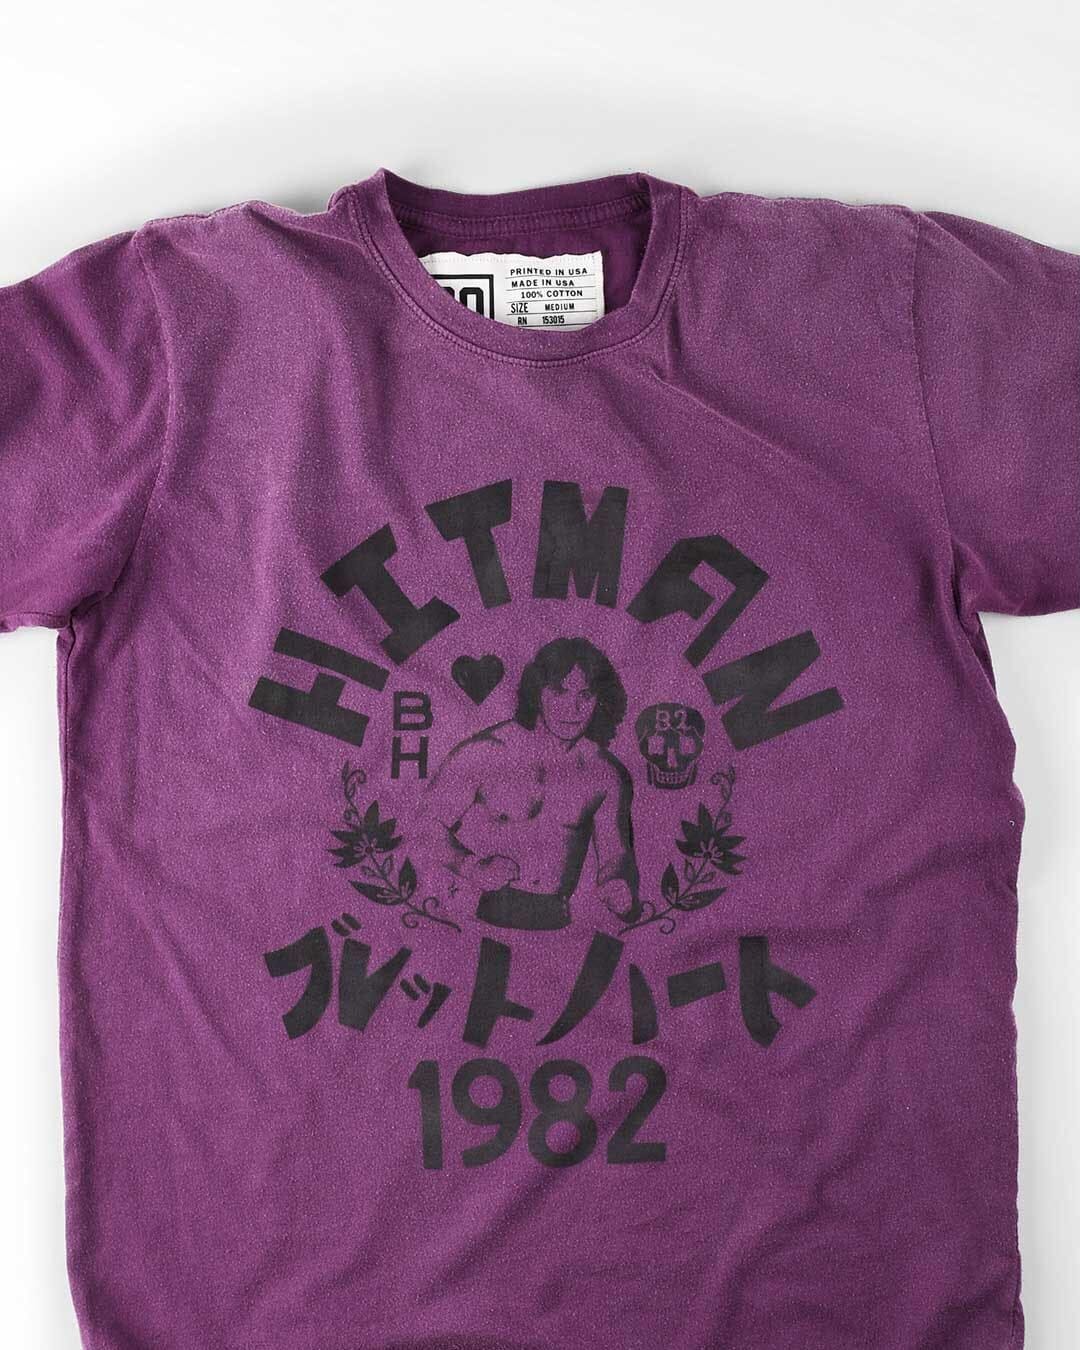 Bret Hart 1982 Purple Tee - Roots of Fight Canada